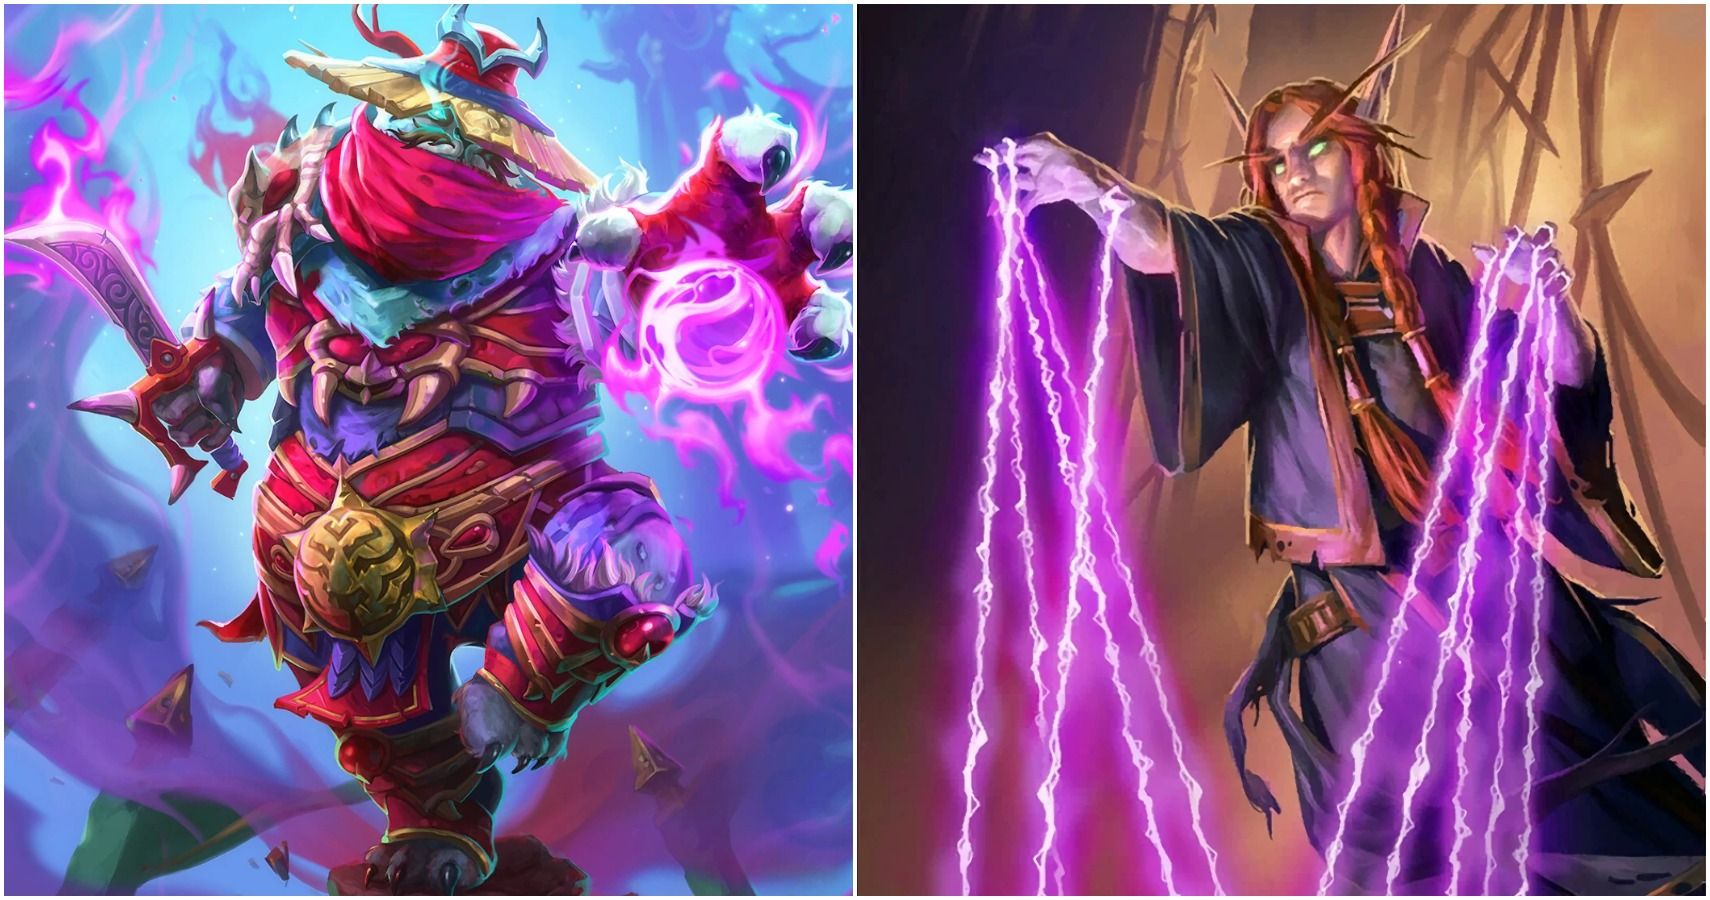 Full art of Tengu and Cabal Acolyte from Hearthstone